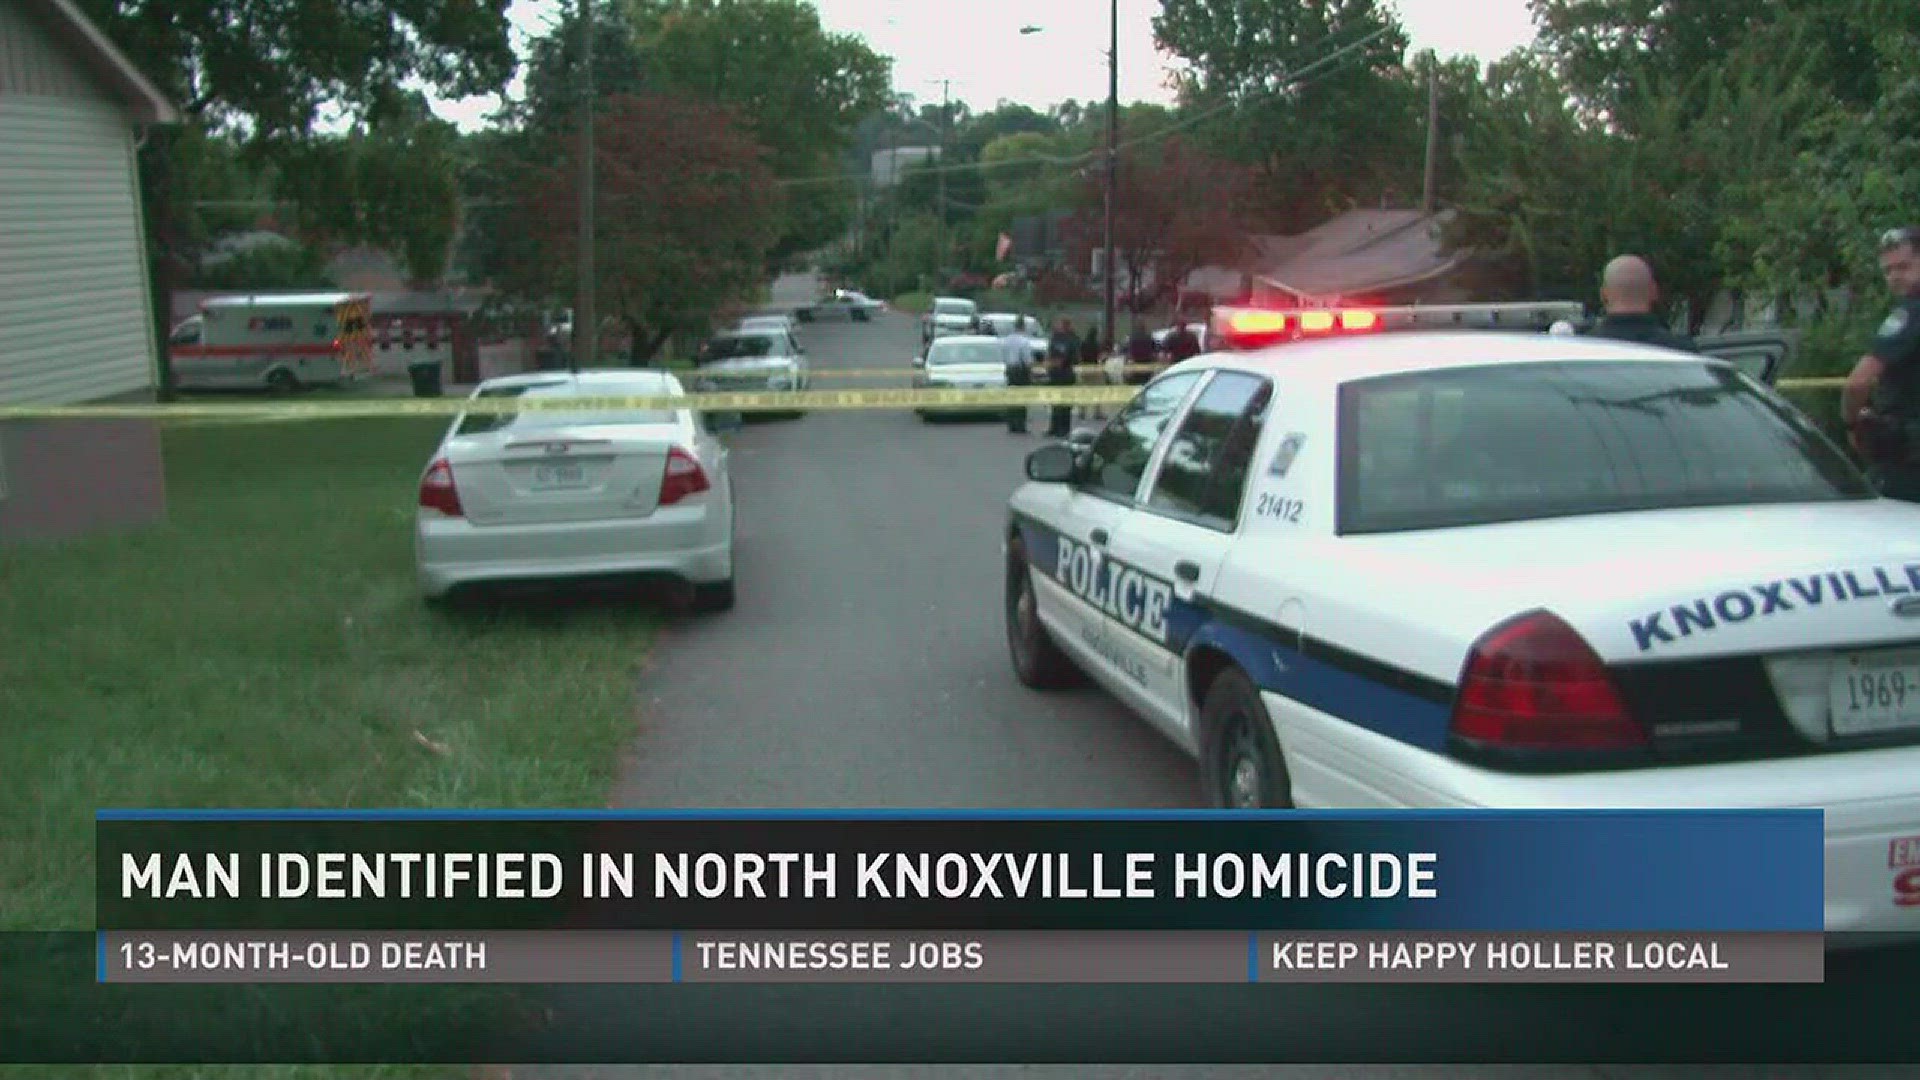 Authorities identified the man found dead in a North Knoxville home.